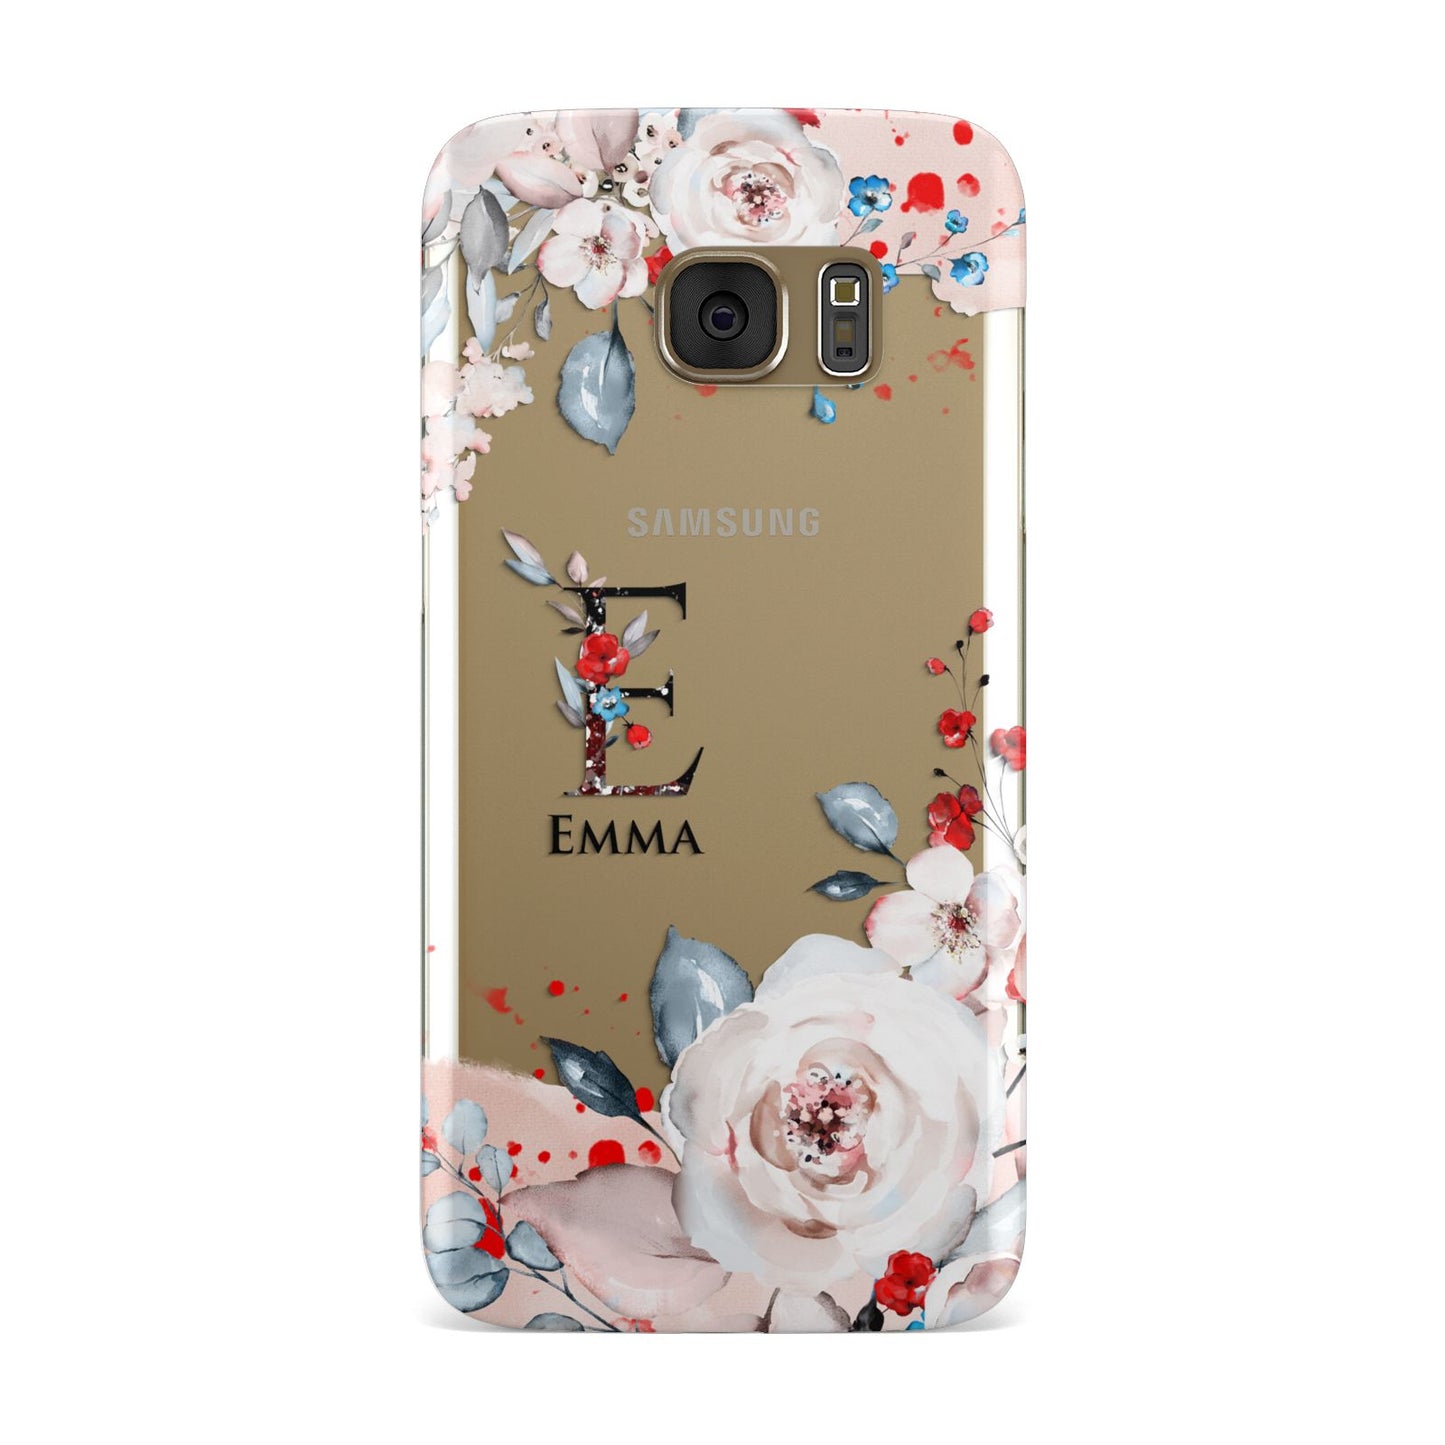 Monogrammed Roses Floral Wreath Samsung Galaxy Case